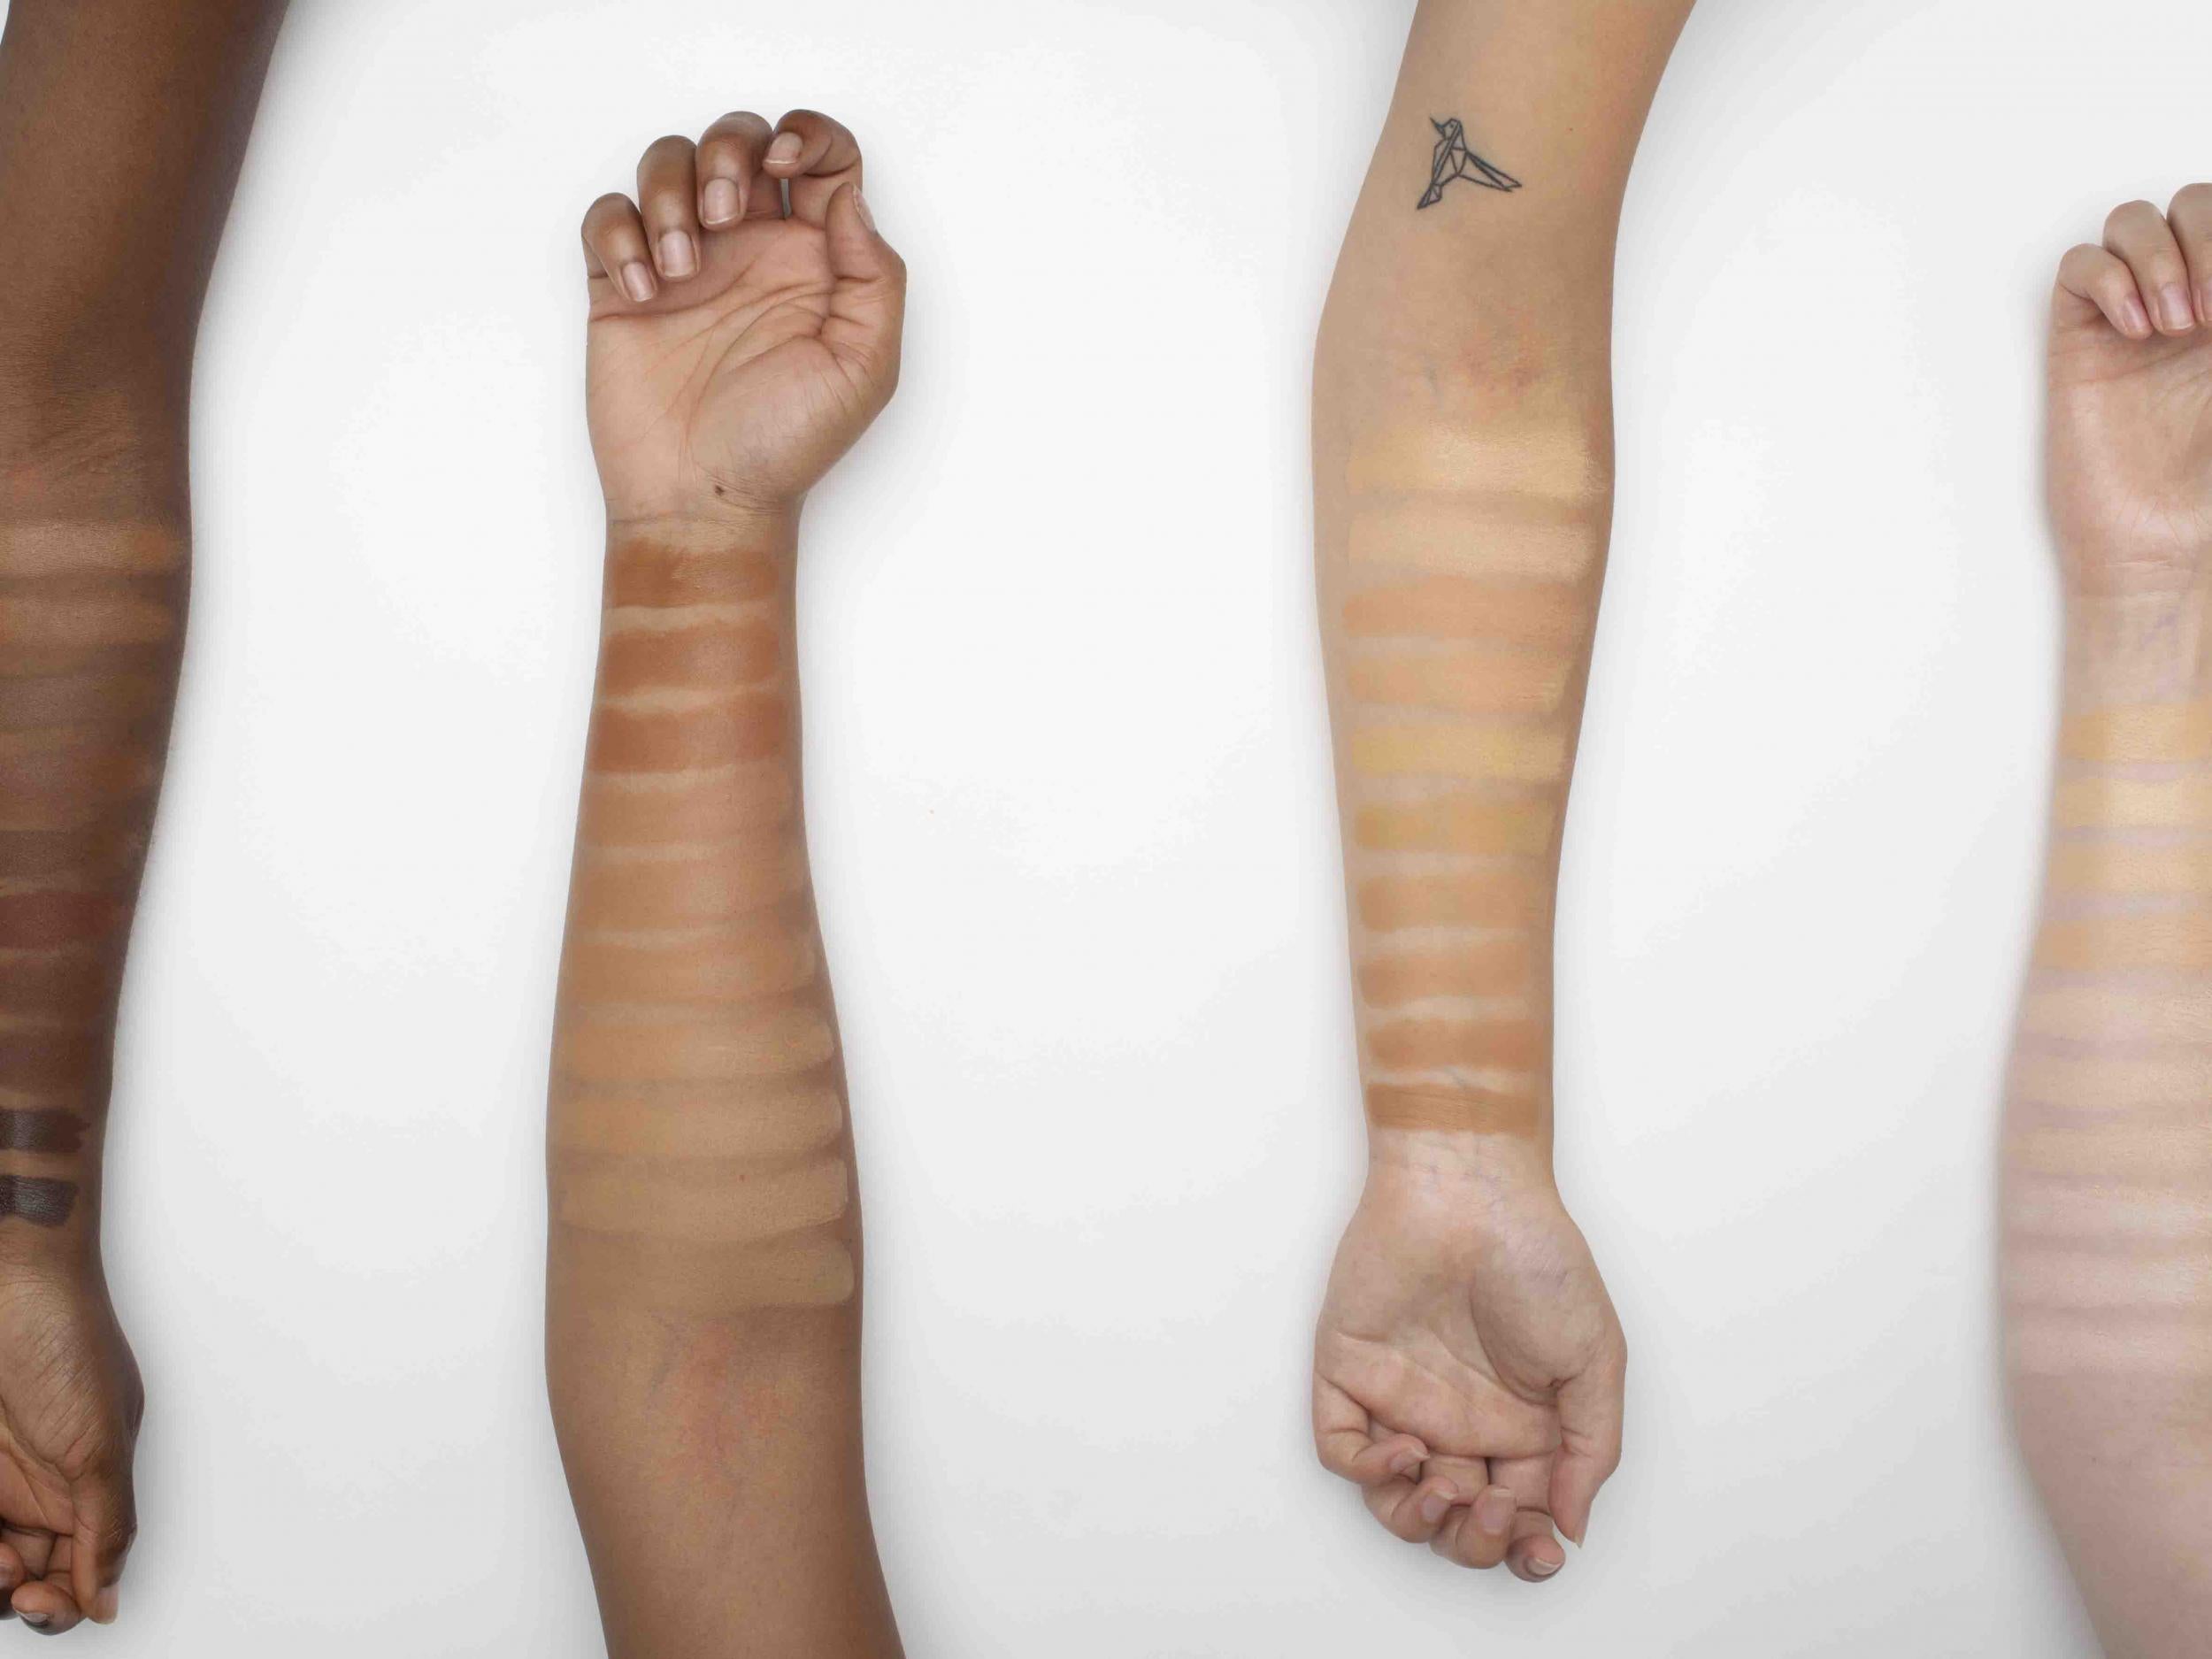 A cruelty-free foundation with 40 shades? Lush is doing it right